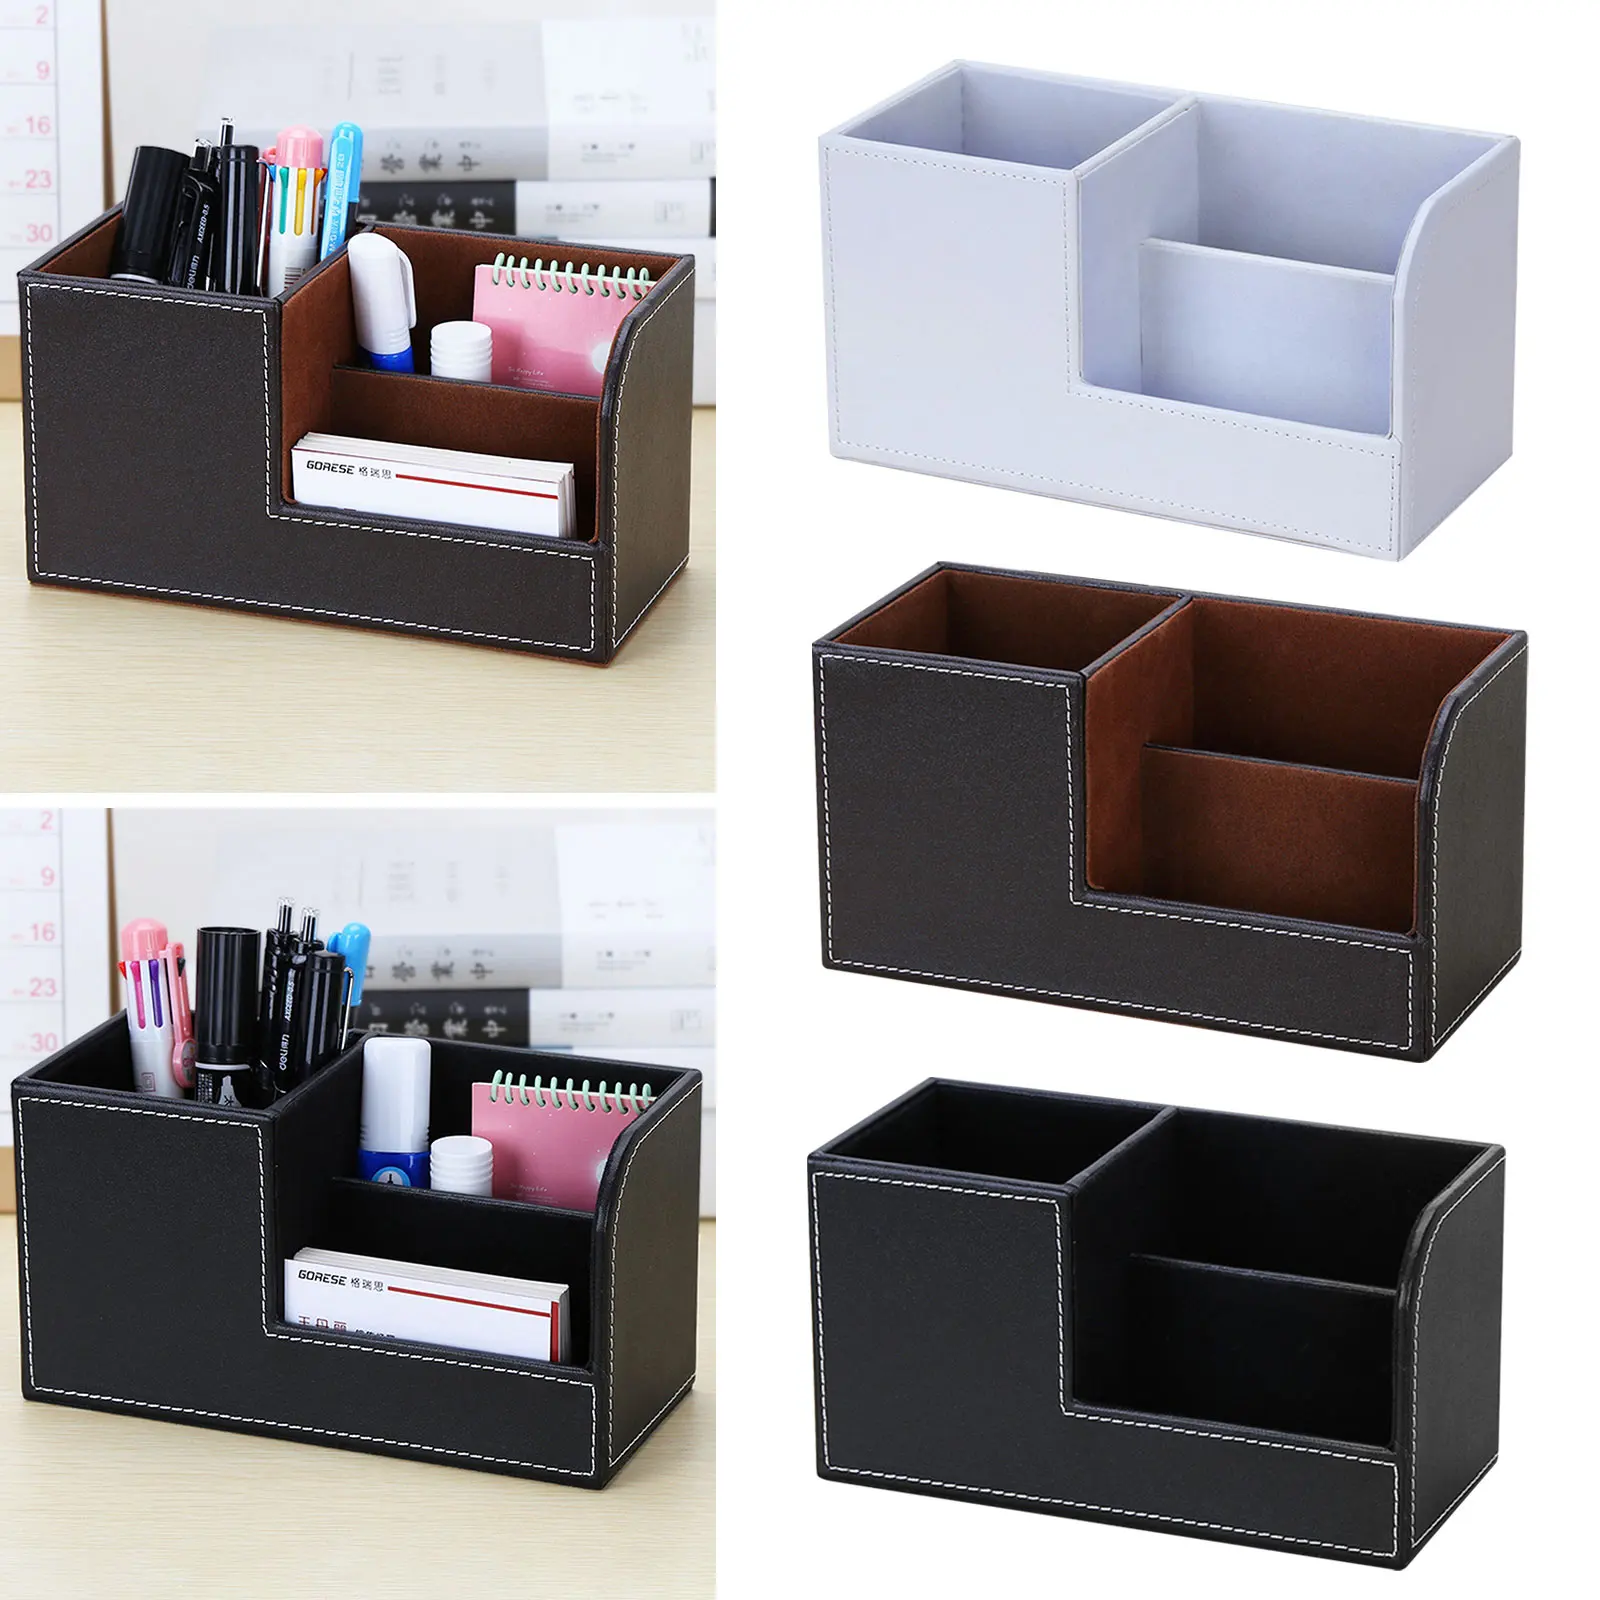 

Fashion PU Leather Desk Organizer Pencil Pen Holder Caddy Storage Box with 3 Compartments for Home Office School Supplies